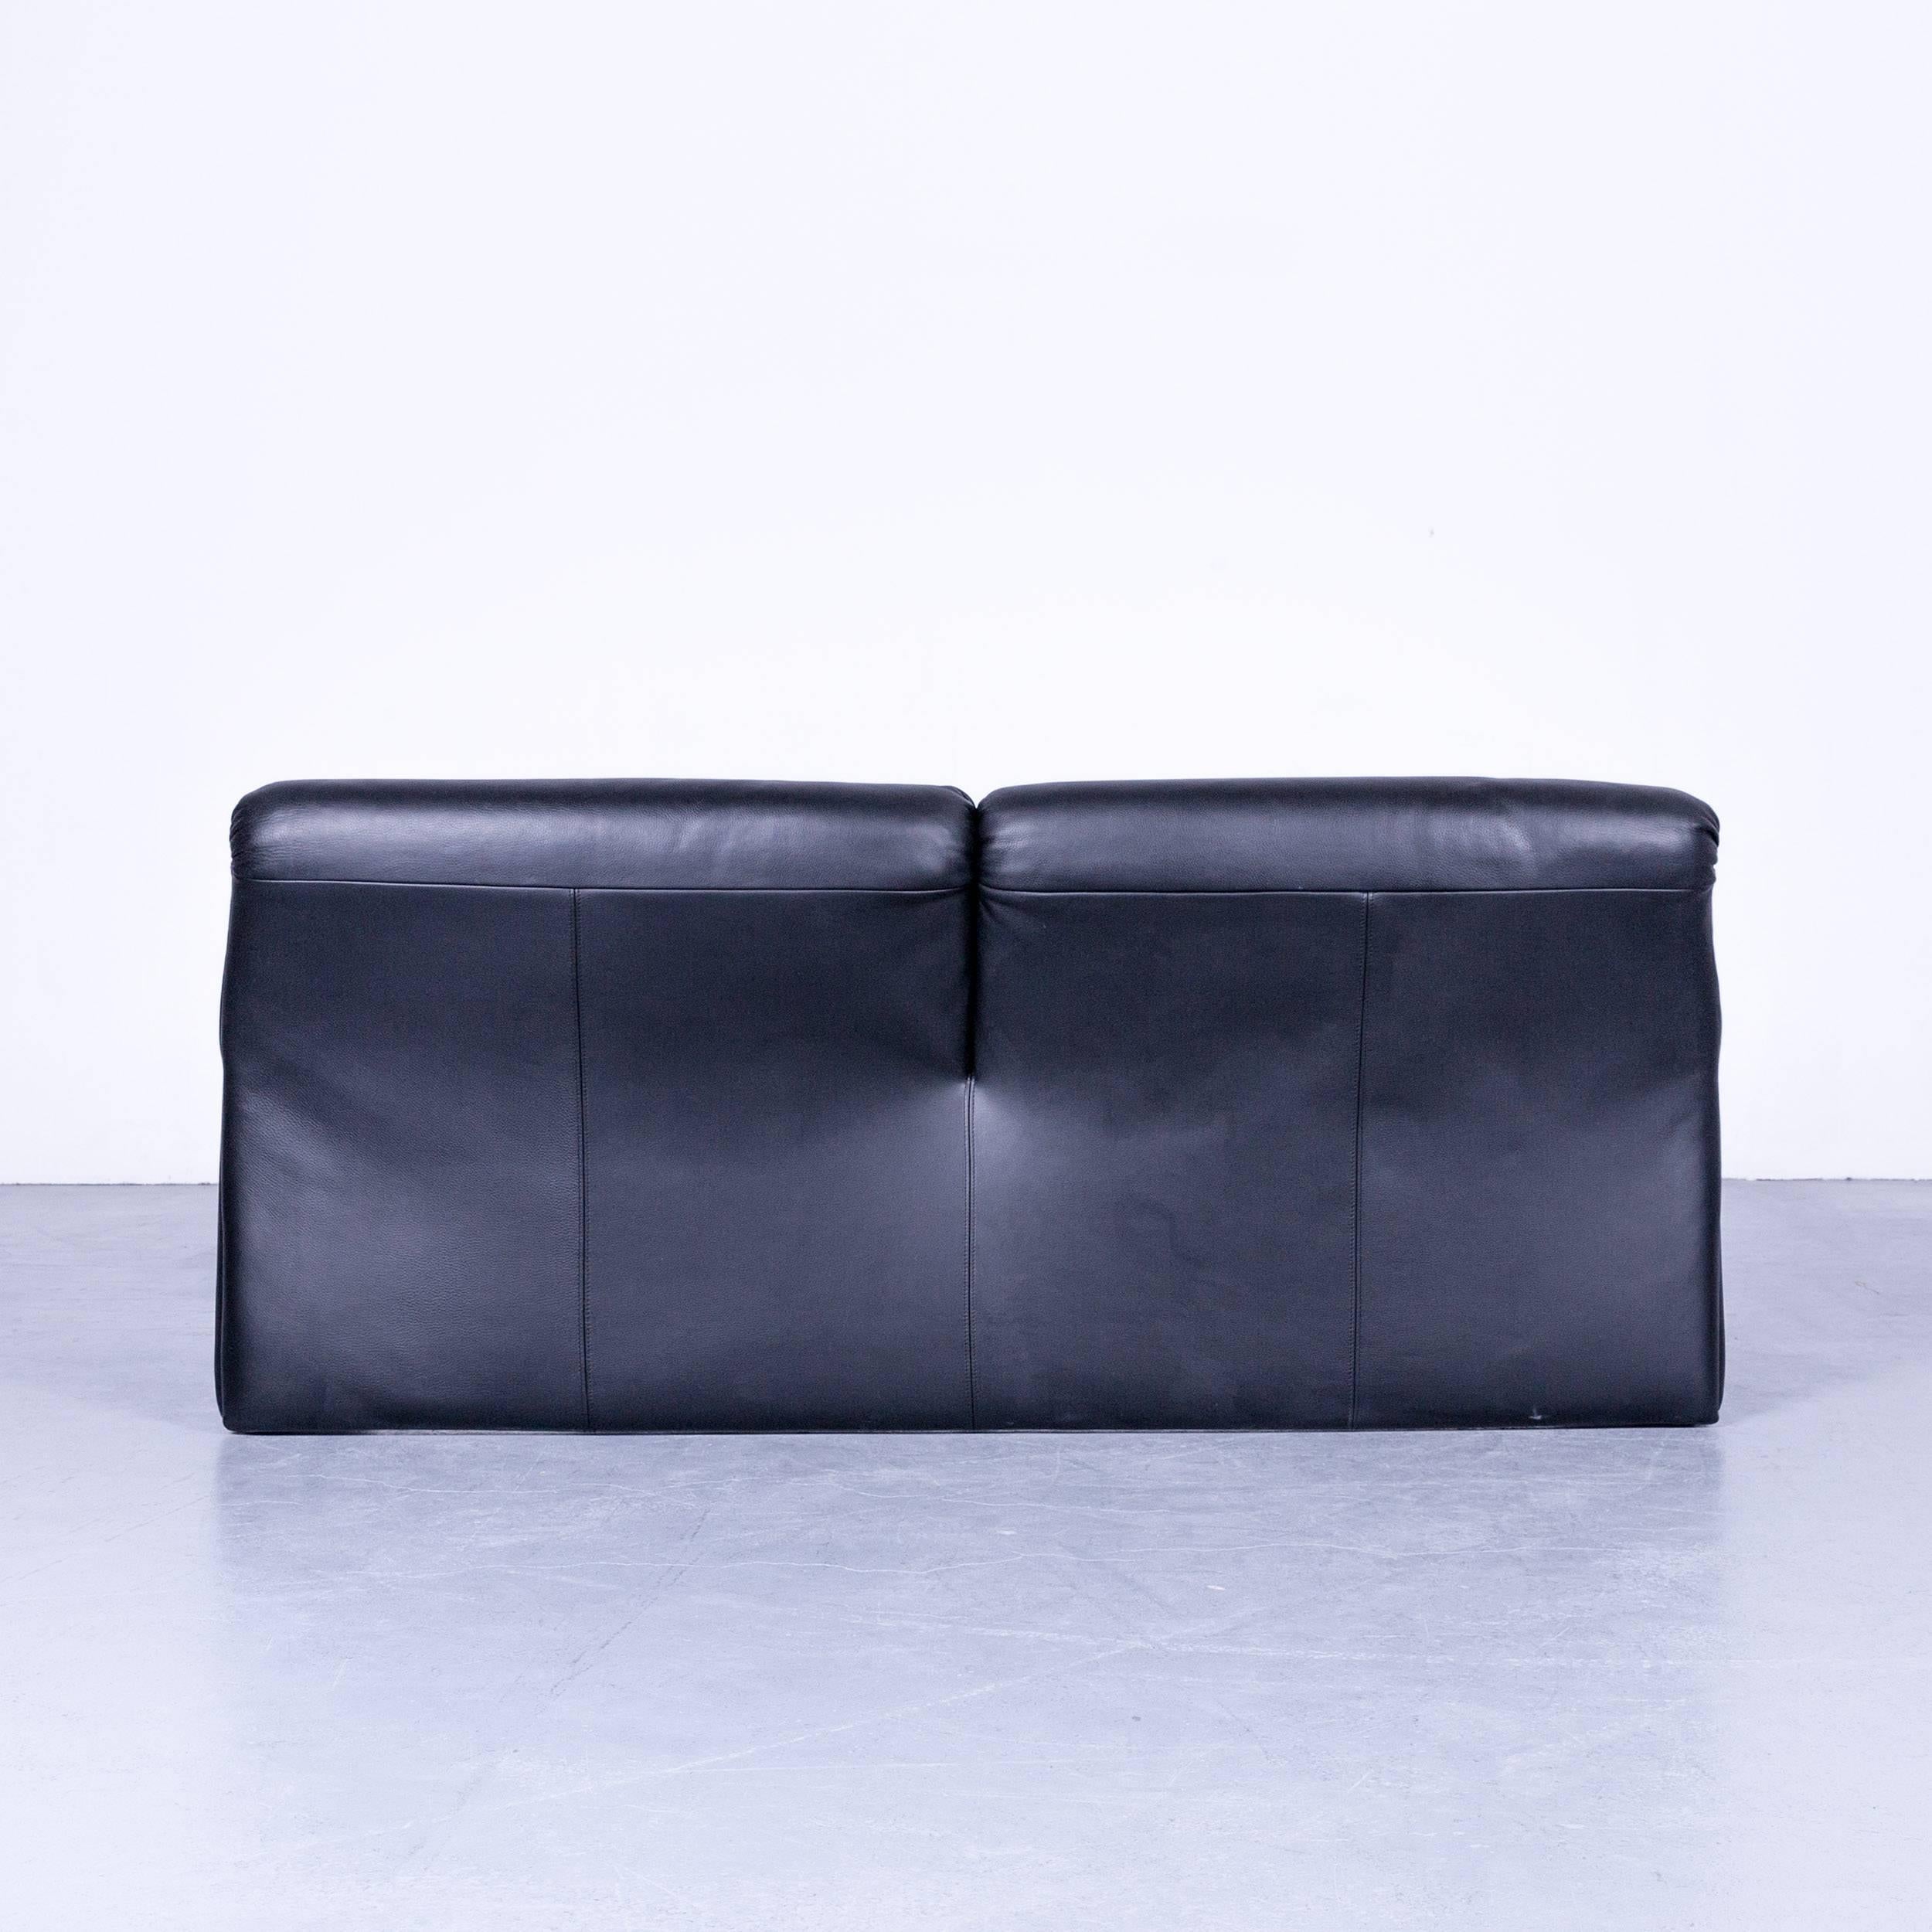 De Sede by Hans Kaufeld Designer Sofa Black Leather Two-Seat Function Modern For Sale 3